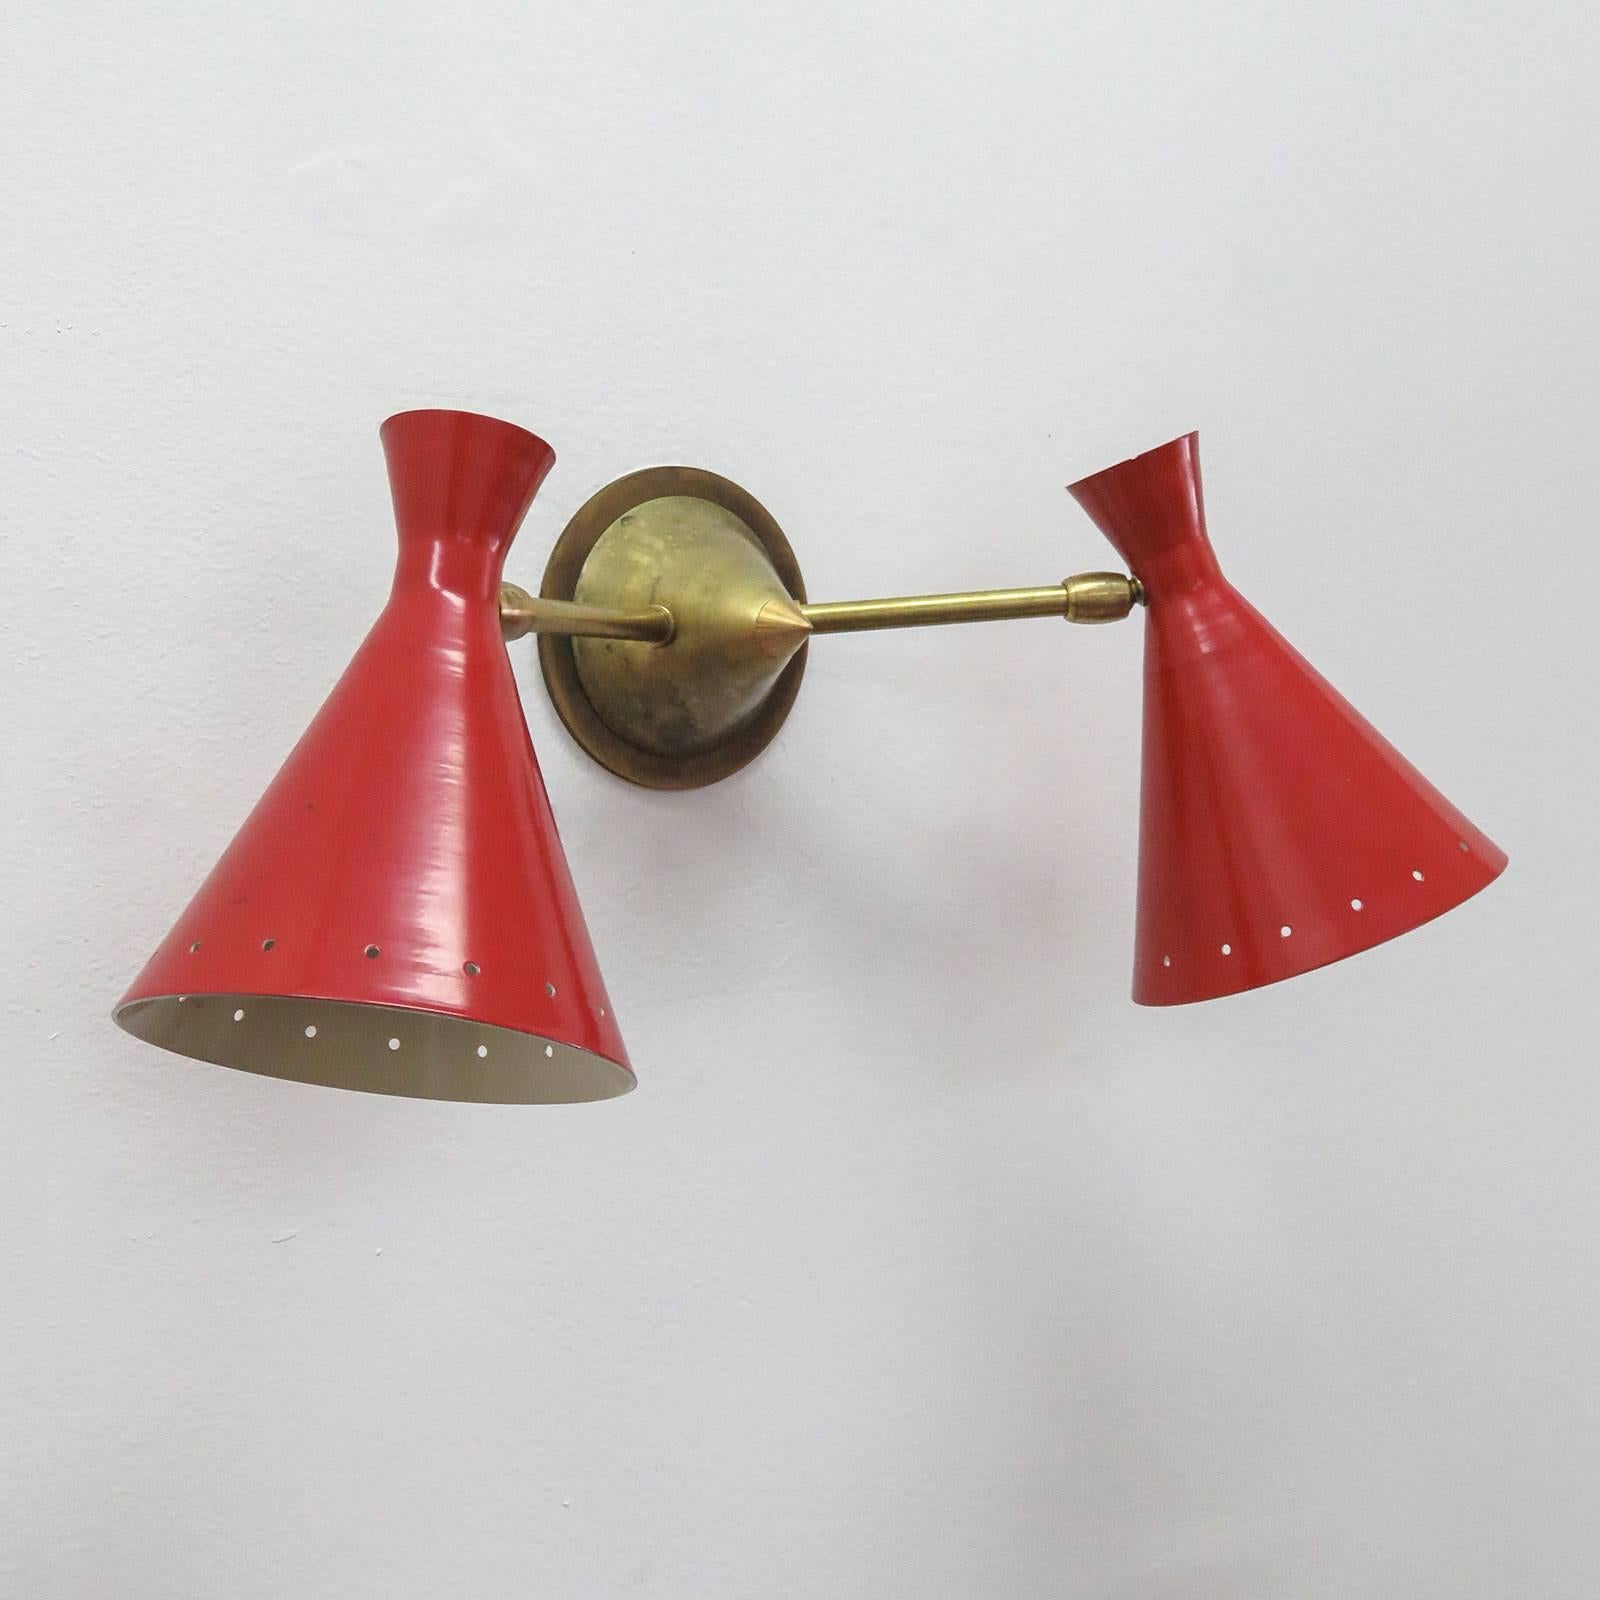 Wonderful articulate Italian double wall lights in black, white and red, double cones with perforations along the bottom rim.
*Black sconce has sold